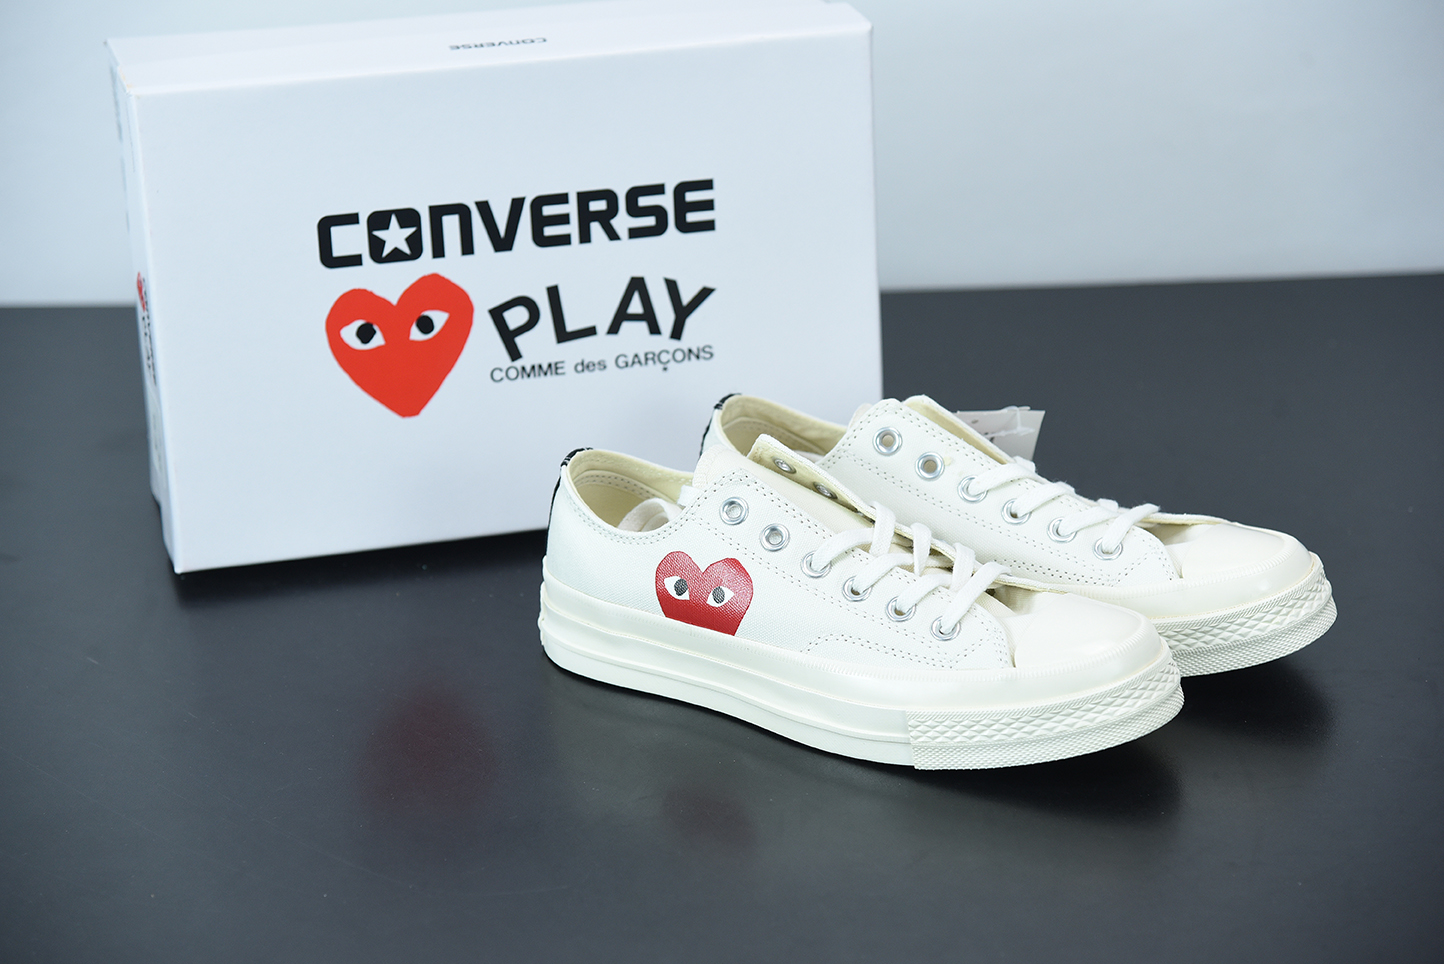 sneakers converse ctas 165190c champion tan white - Star 70 Ox ' Play' Milk/White - CDG x Converse Chuck Taylor All - High Risk Red – OnlinenevadaShops